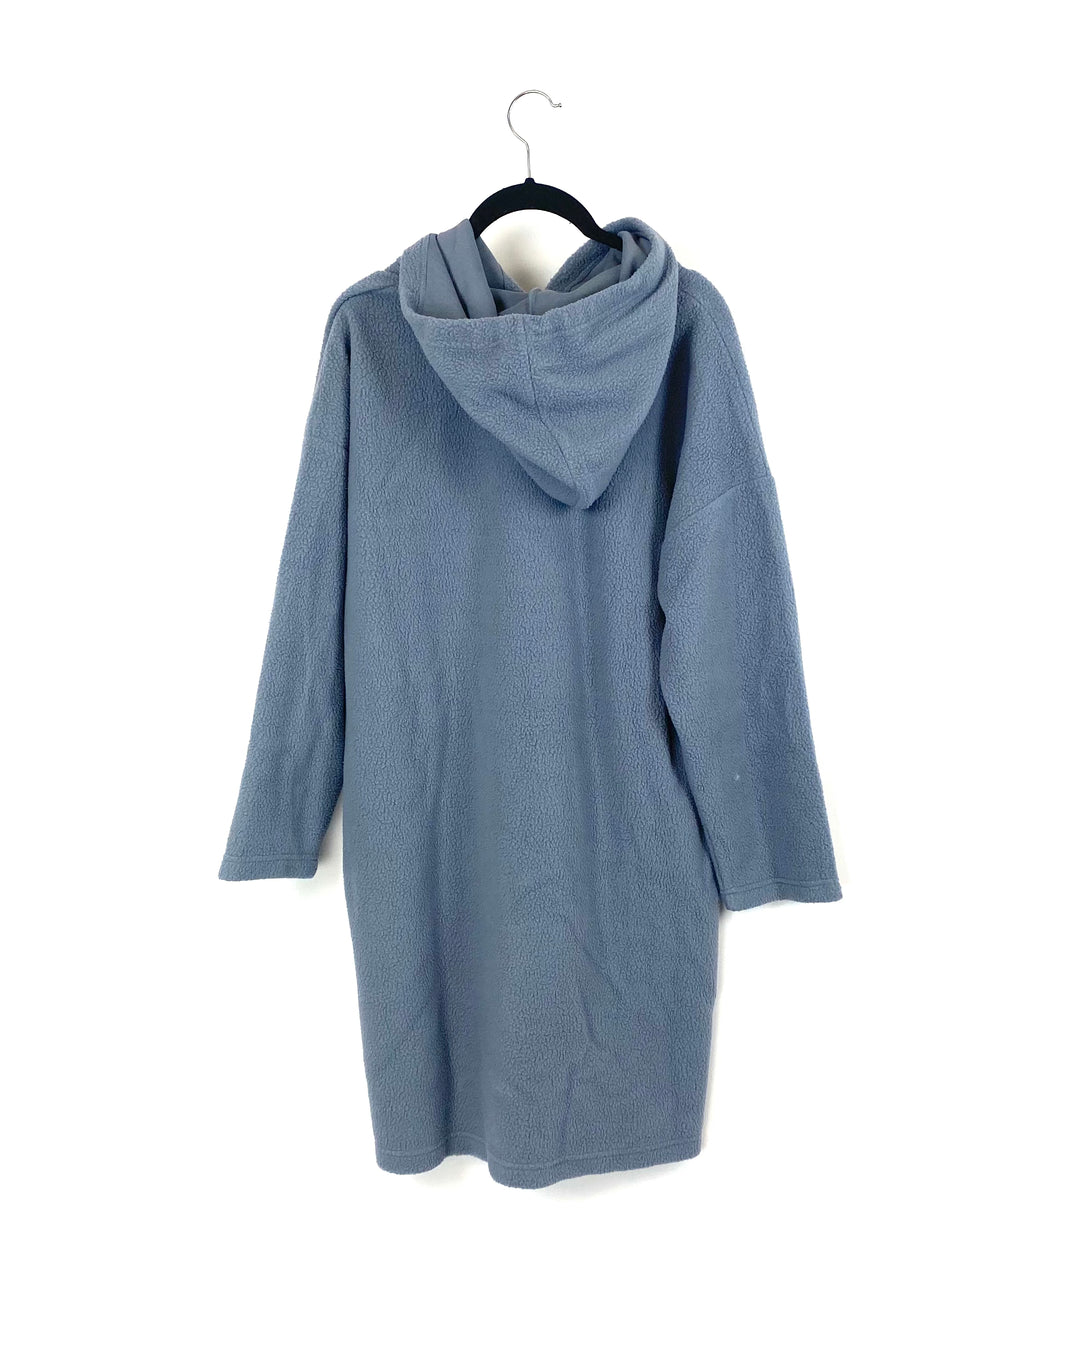 Dusty Blue Sherpa Long Pullover - Small